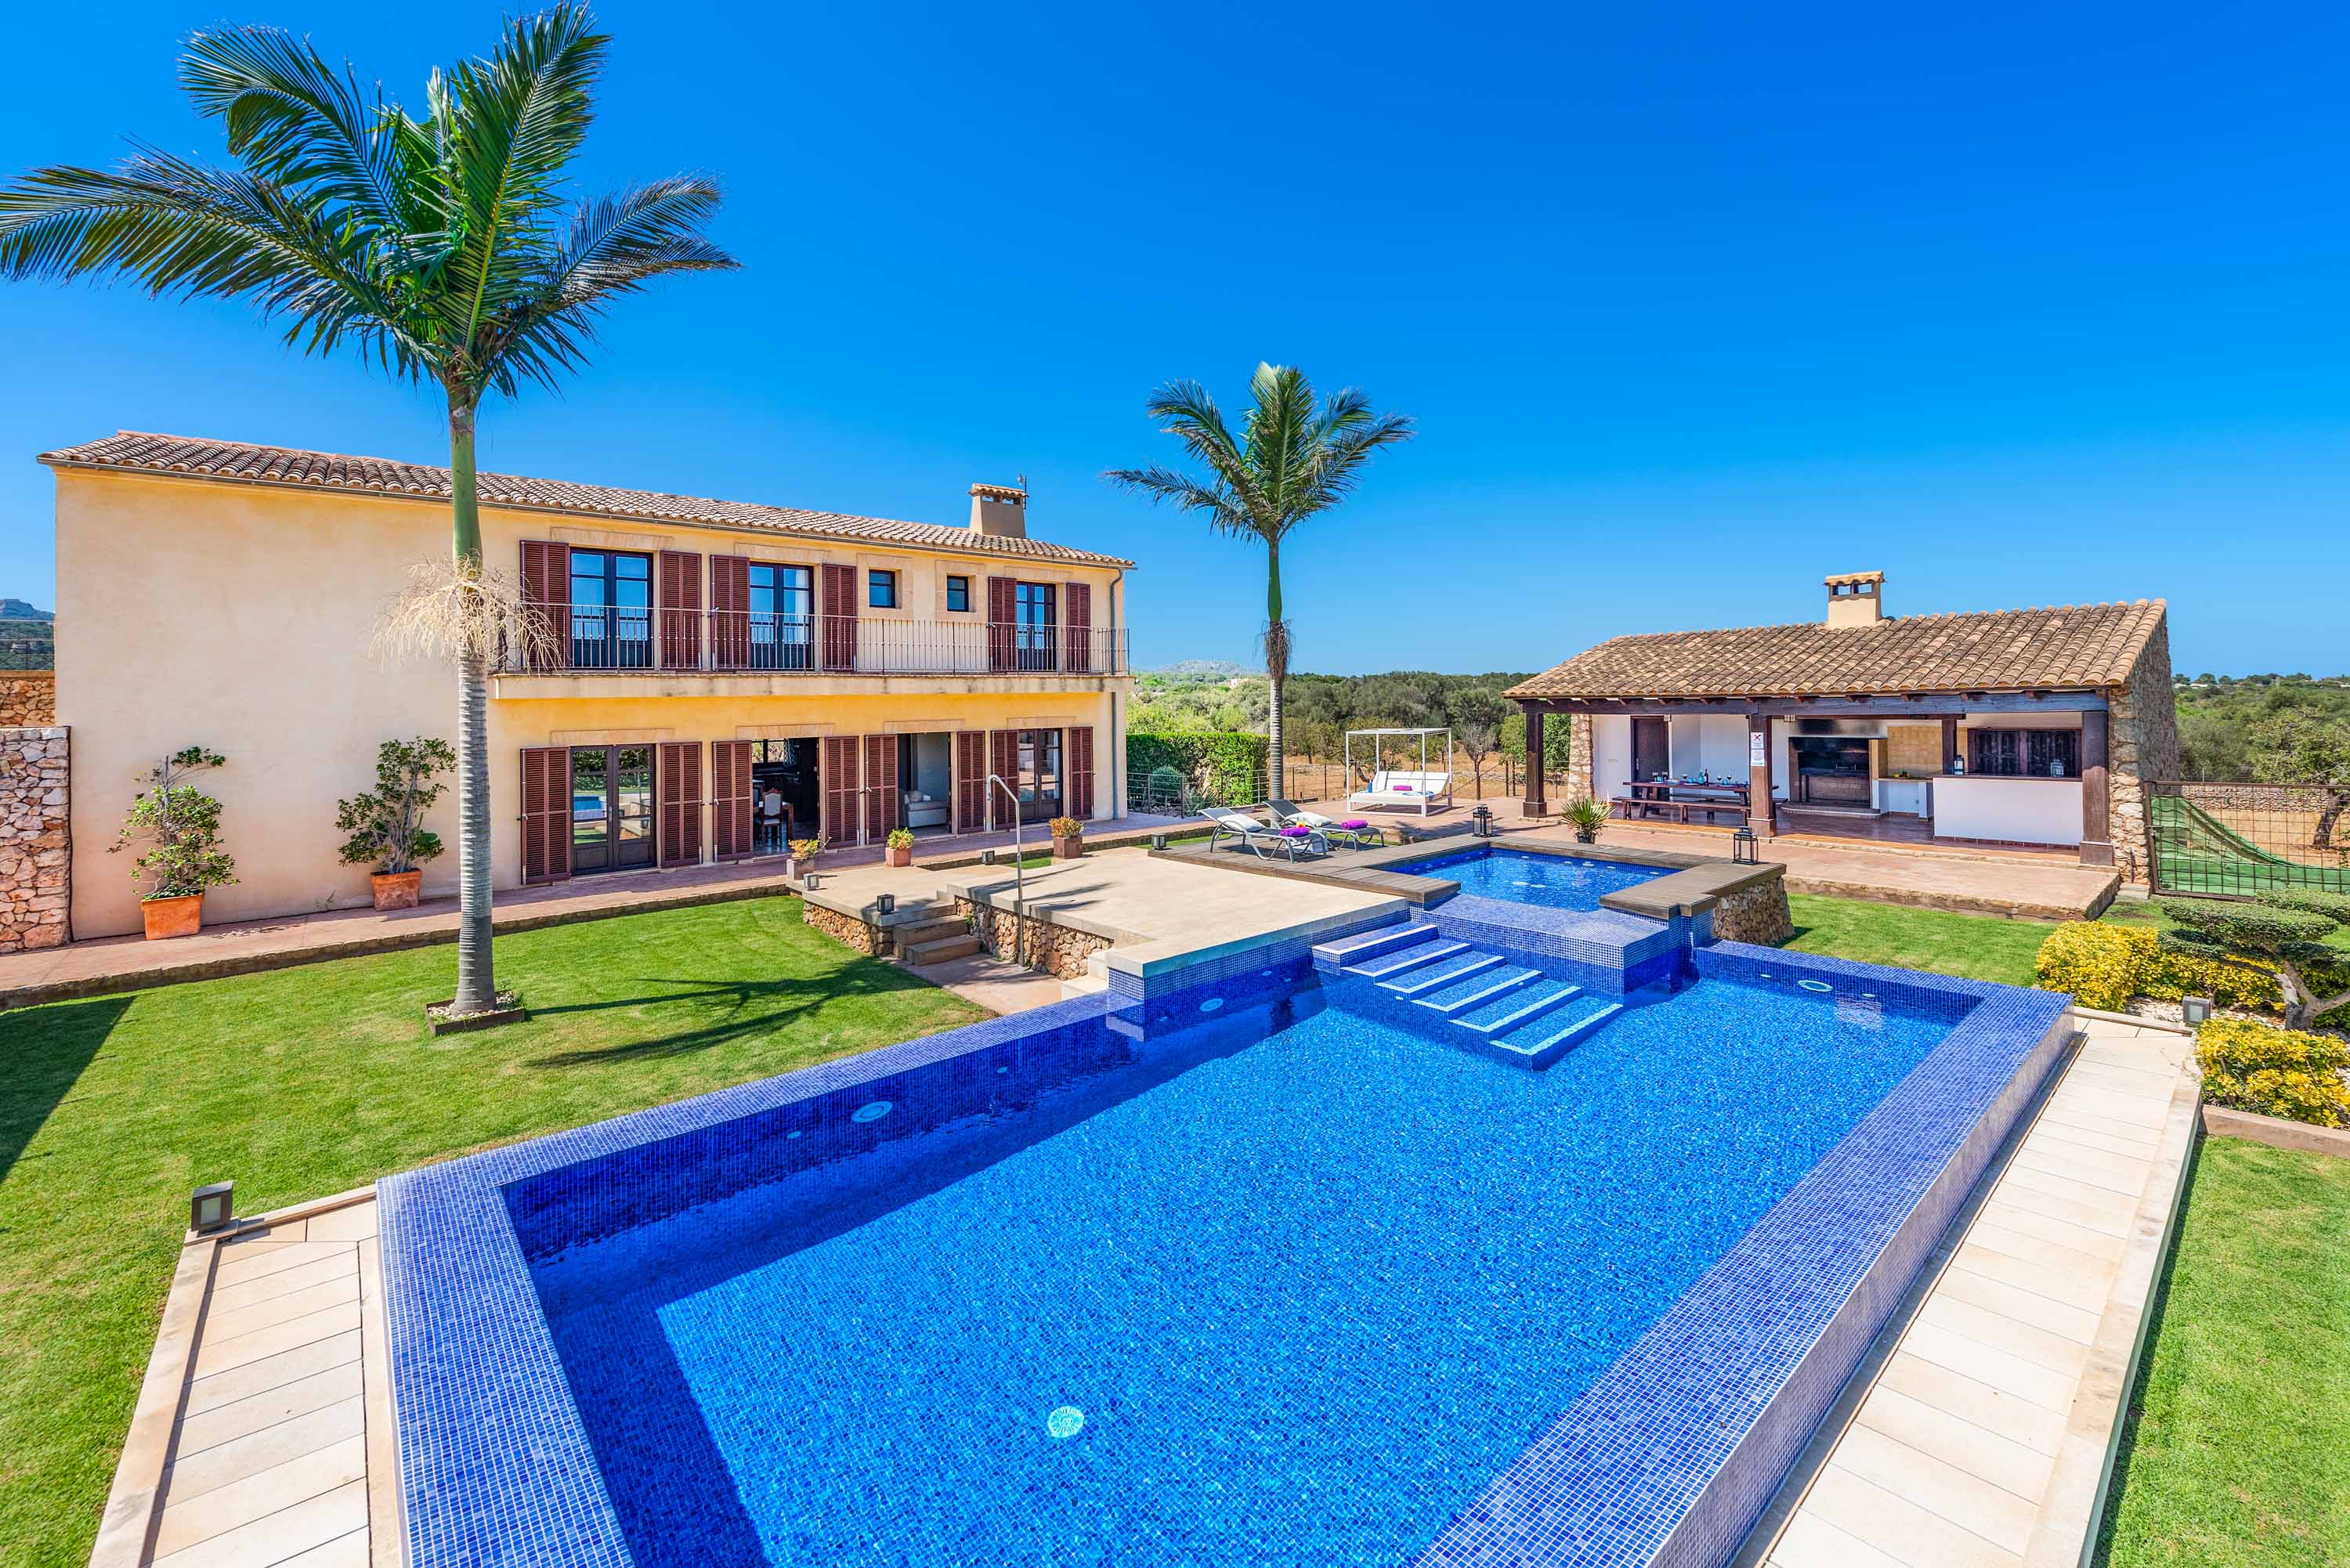 Property Image 2 - Gorgeous Mediterranean Villa with Nice Pool and Lawn